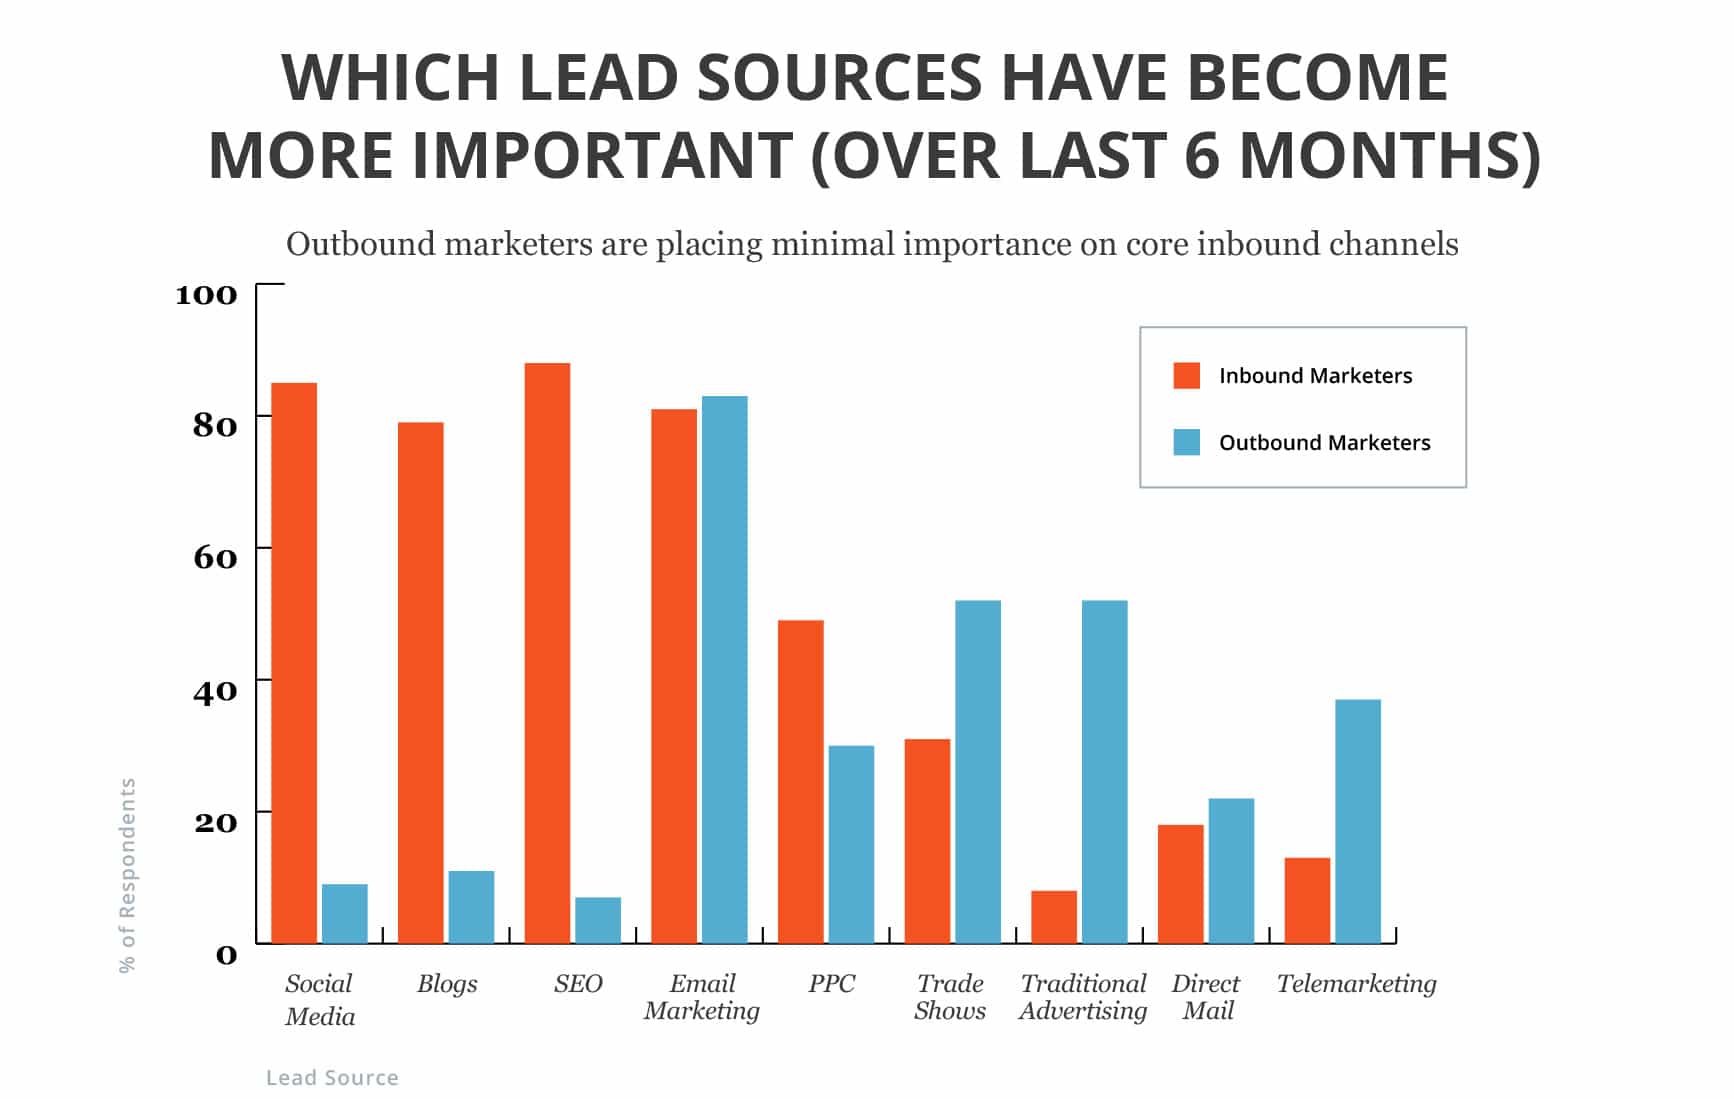 Inbound and Outbound Marketing Leads Sources